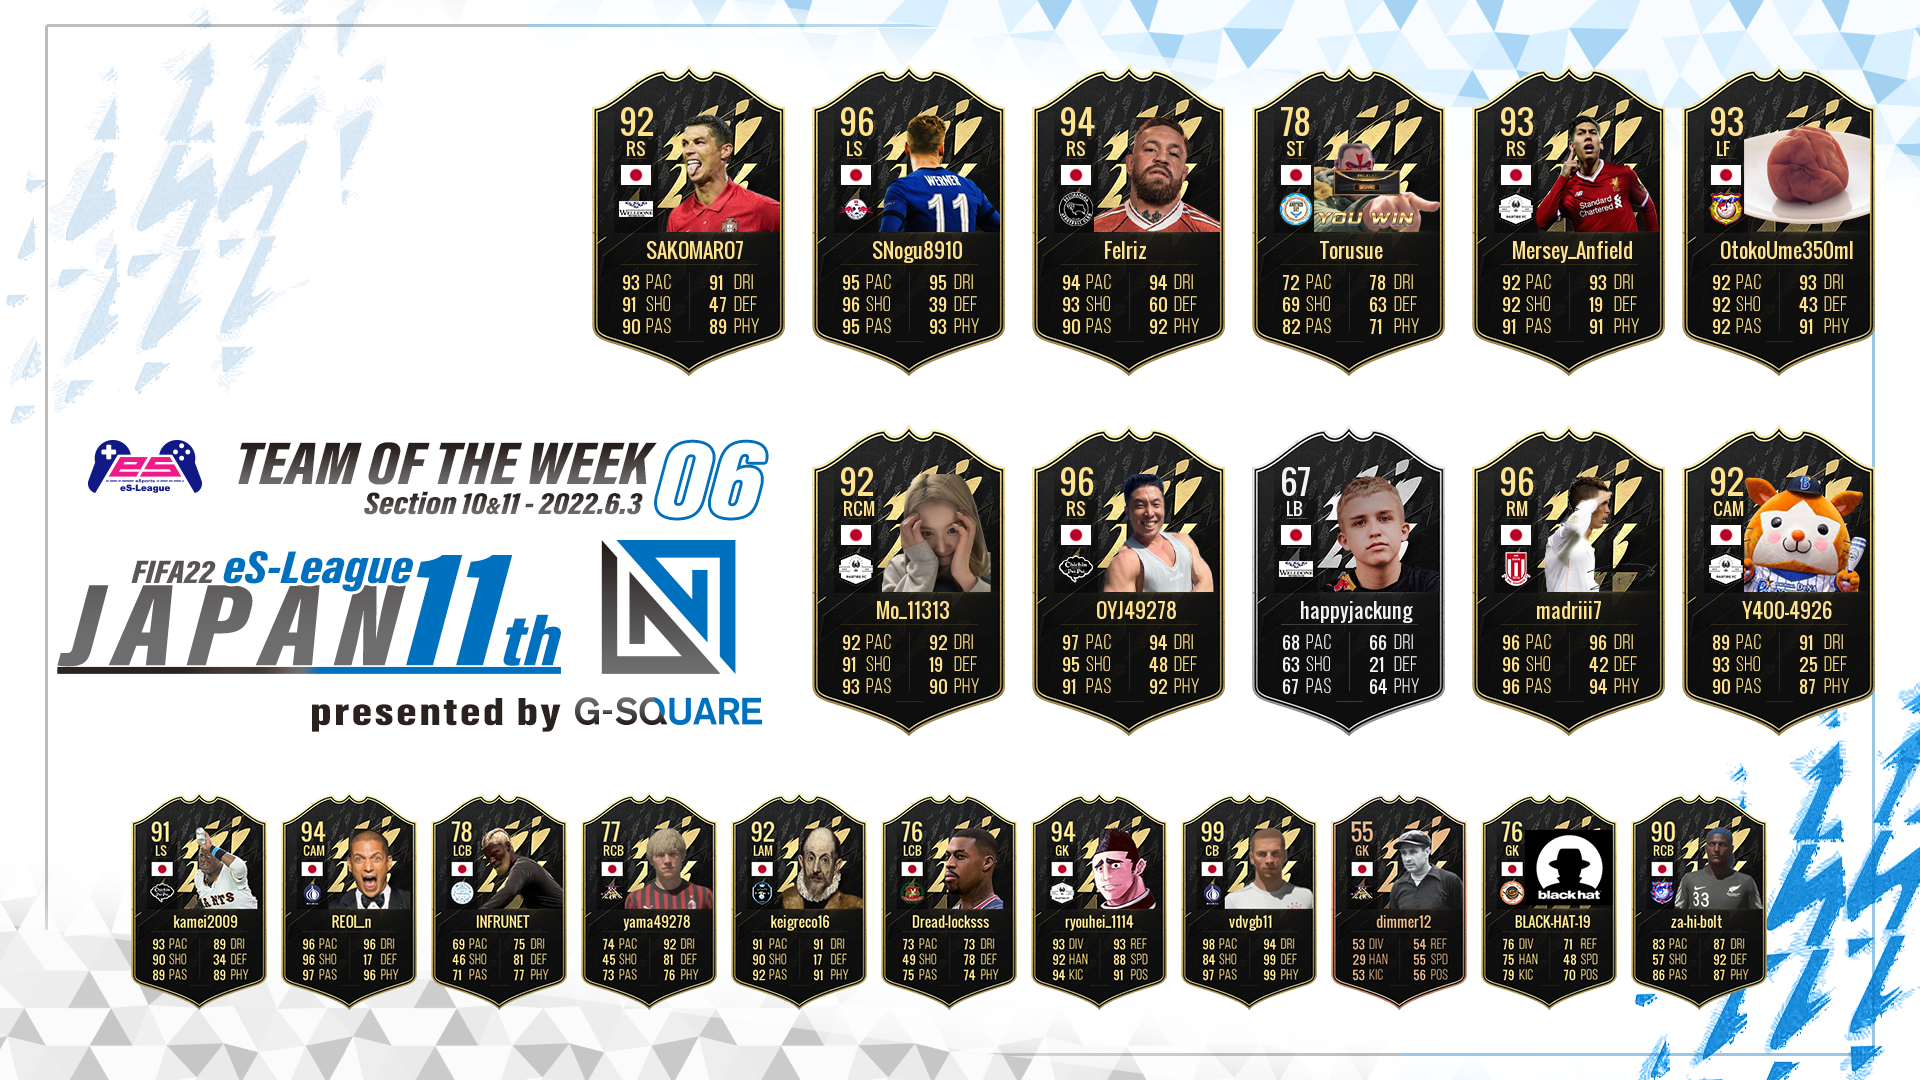 FIFA22 eS-League JAPAN 11th presented by G-SQUARE TOTW06